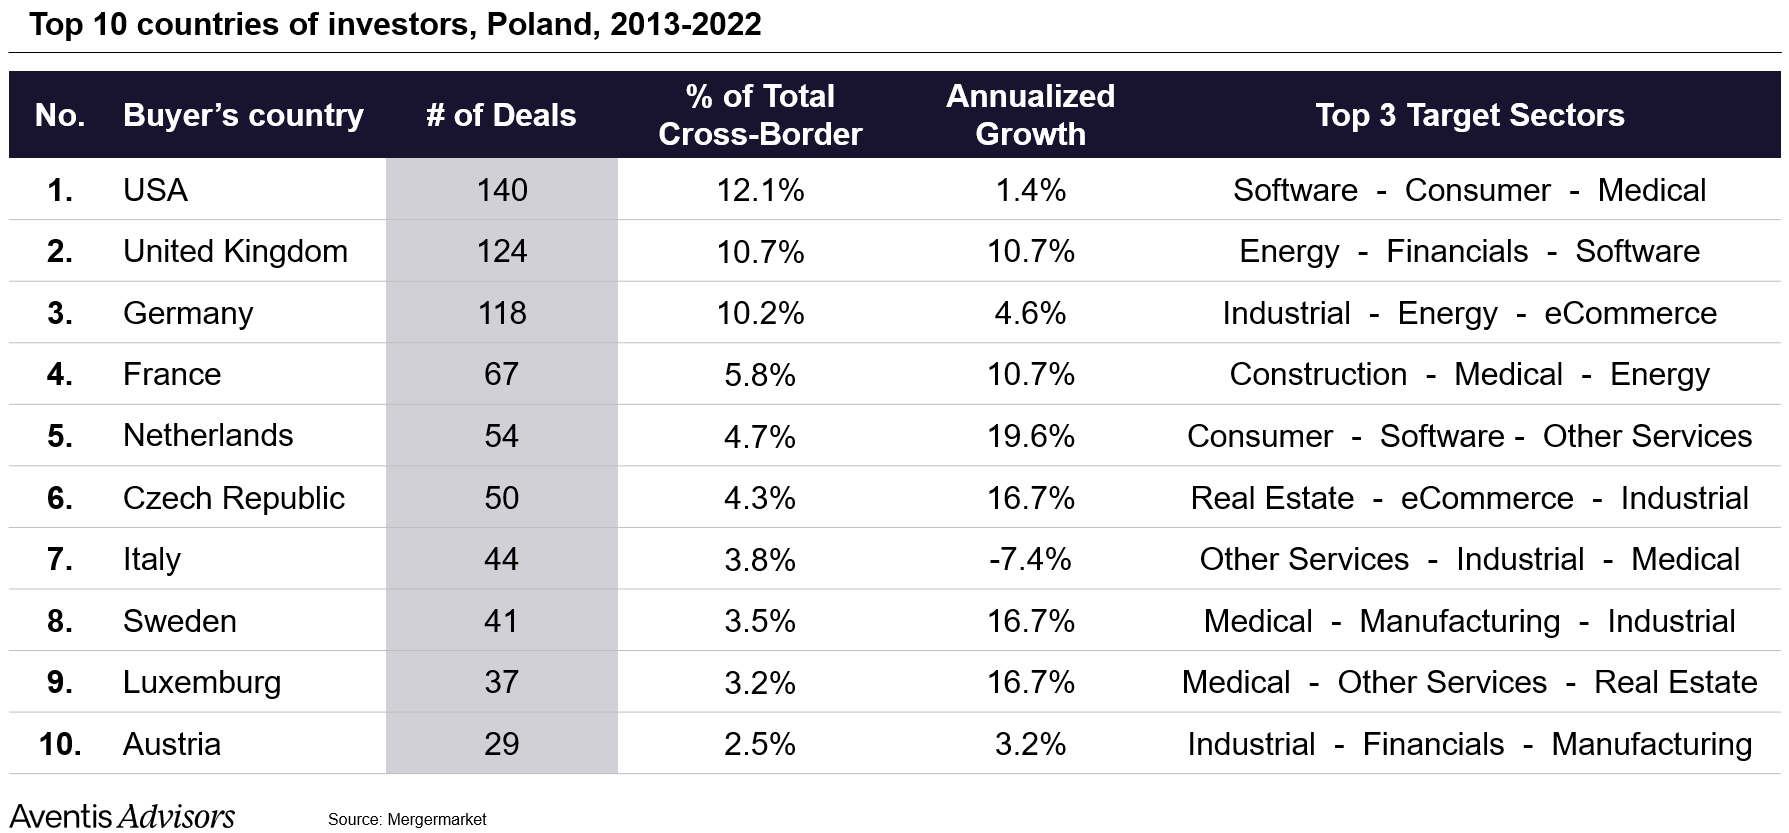 Top 10 countries of investors in Poland, including top three target sectors. 